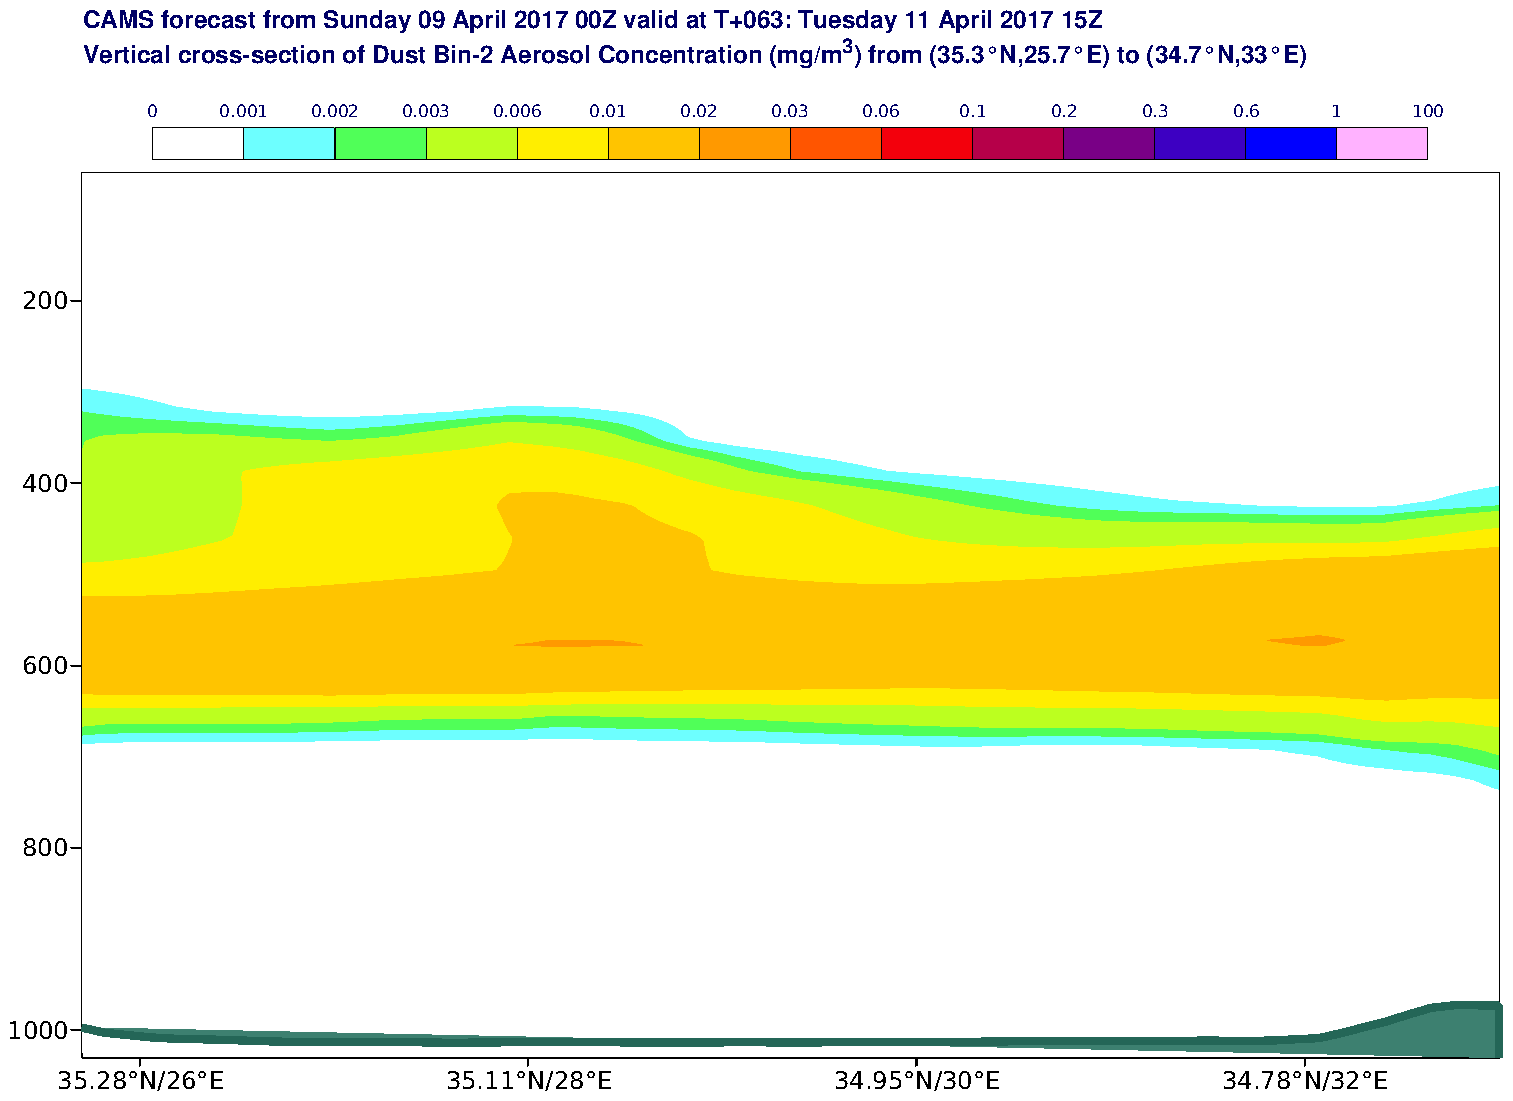 Vertical cross-section of Dust Bin-2 Aerosol Concentration (mg/m3) valid at T63 - 2017-04-11 15:00